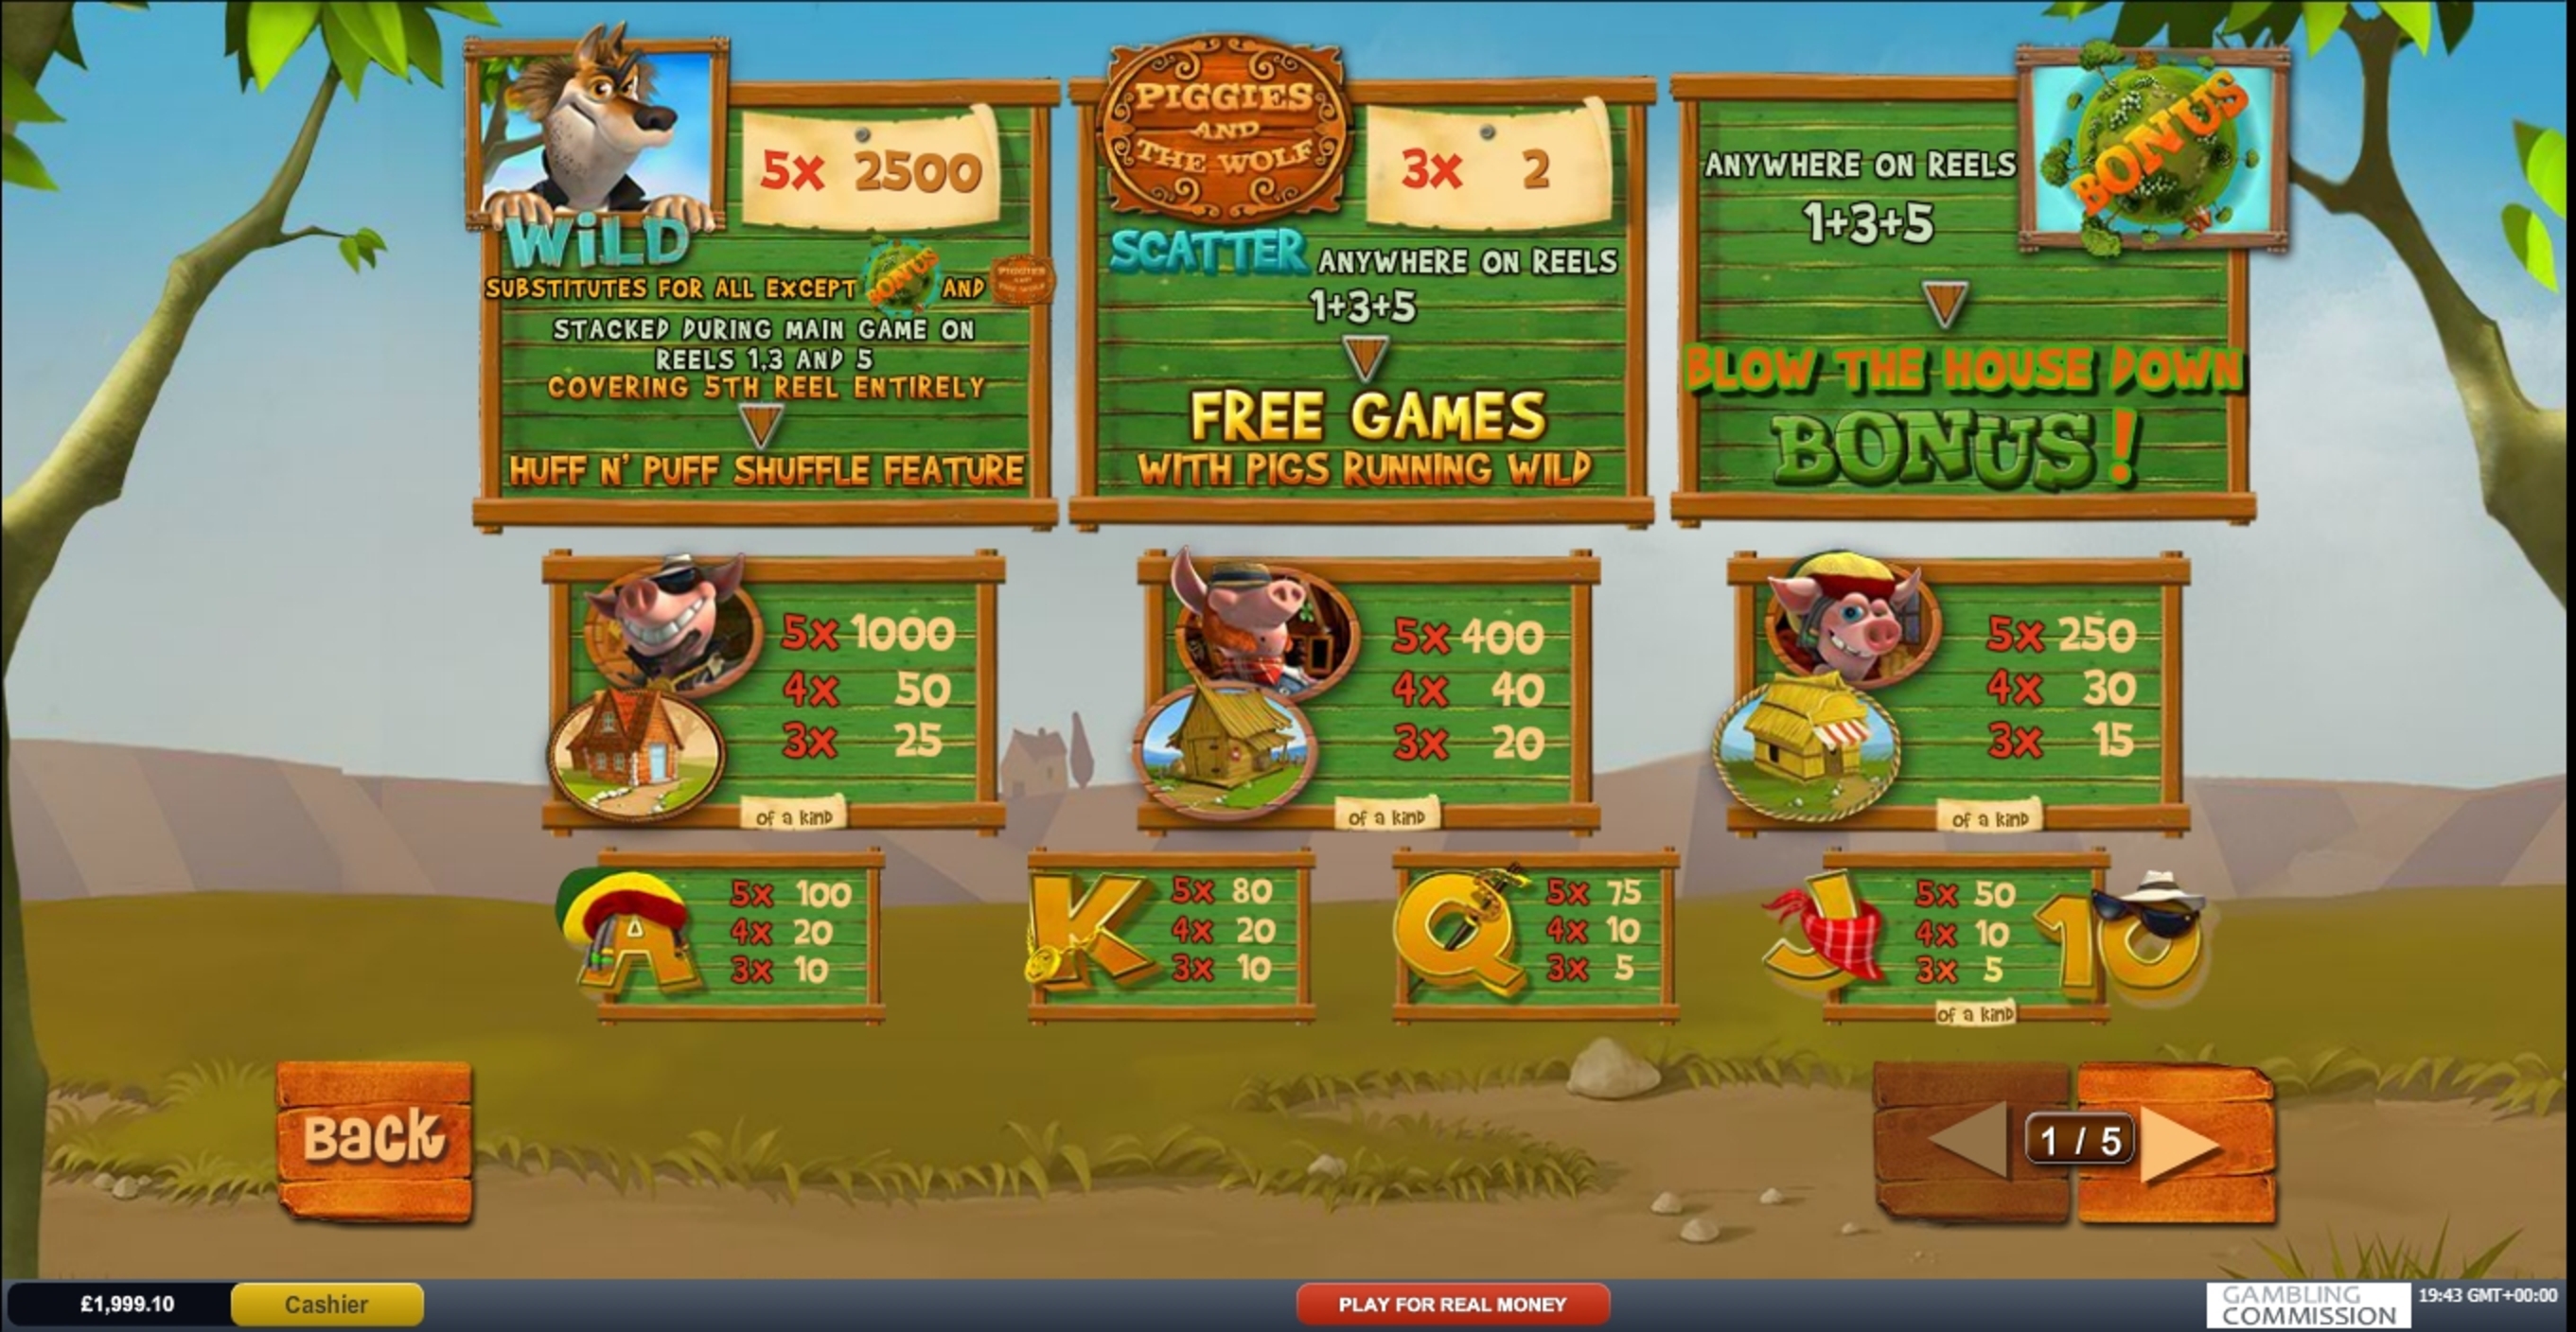 Info of Piggies and The Wolf Slot Game by Playtech